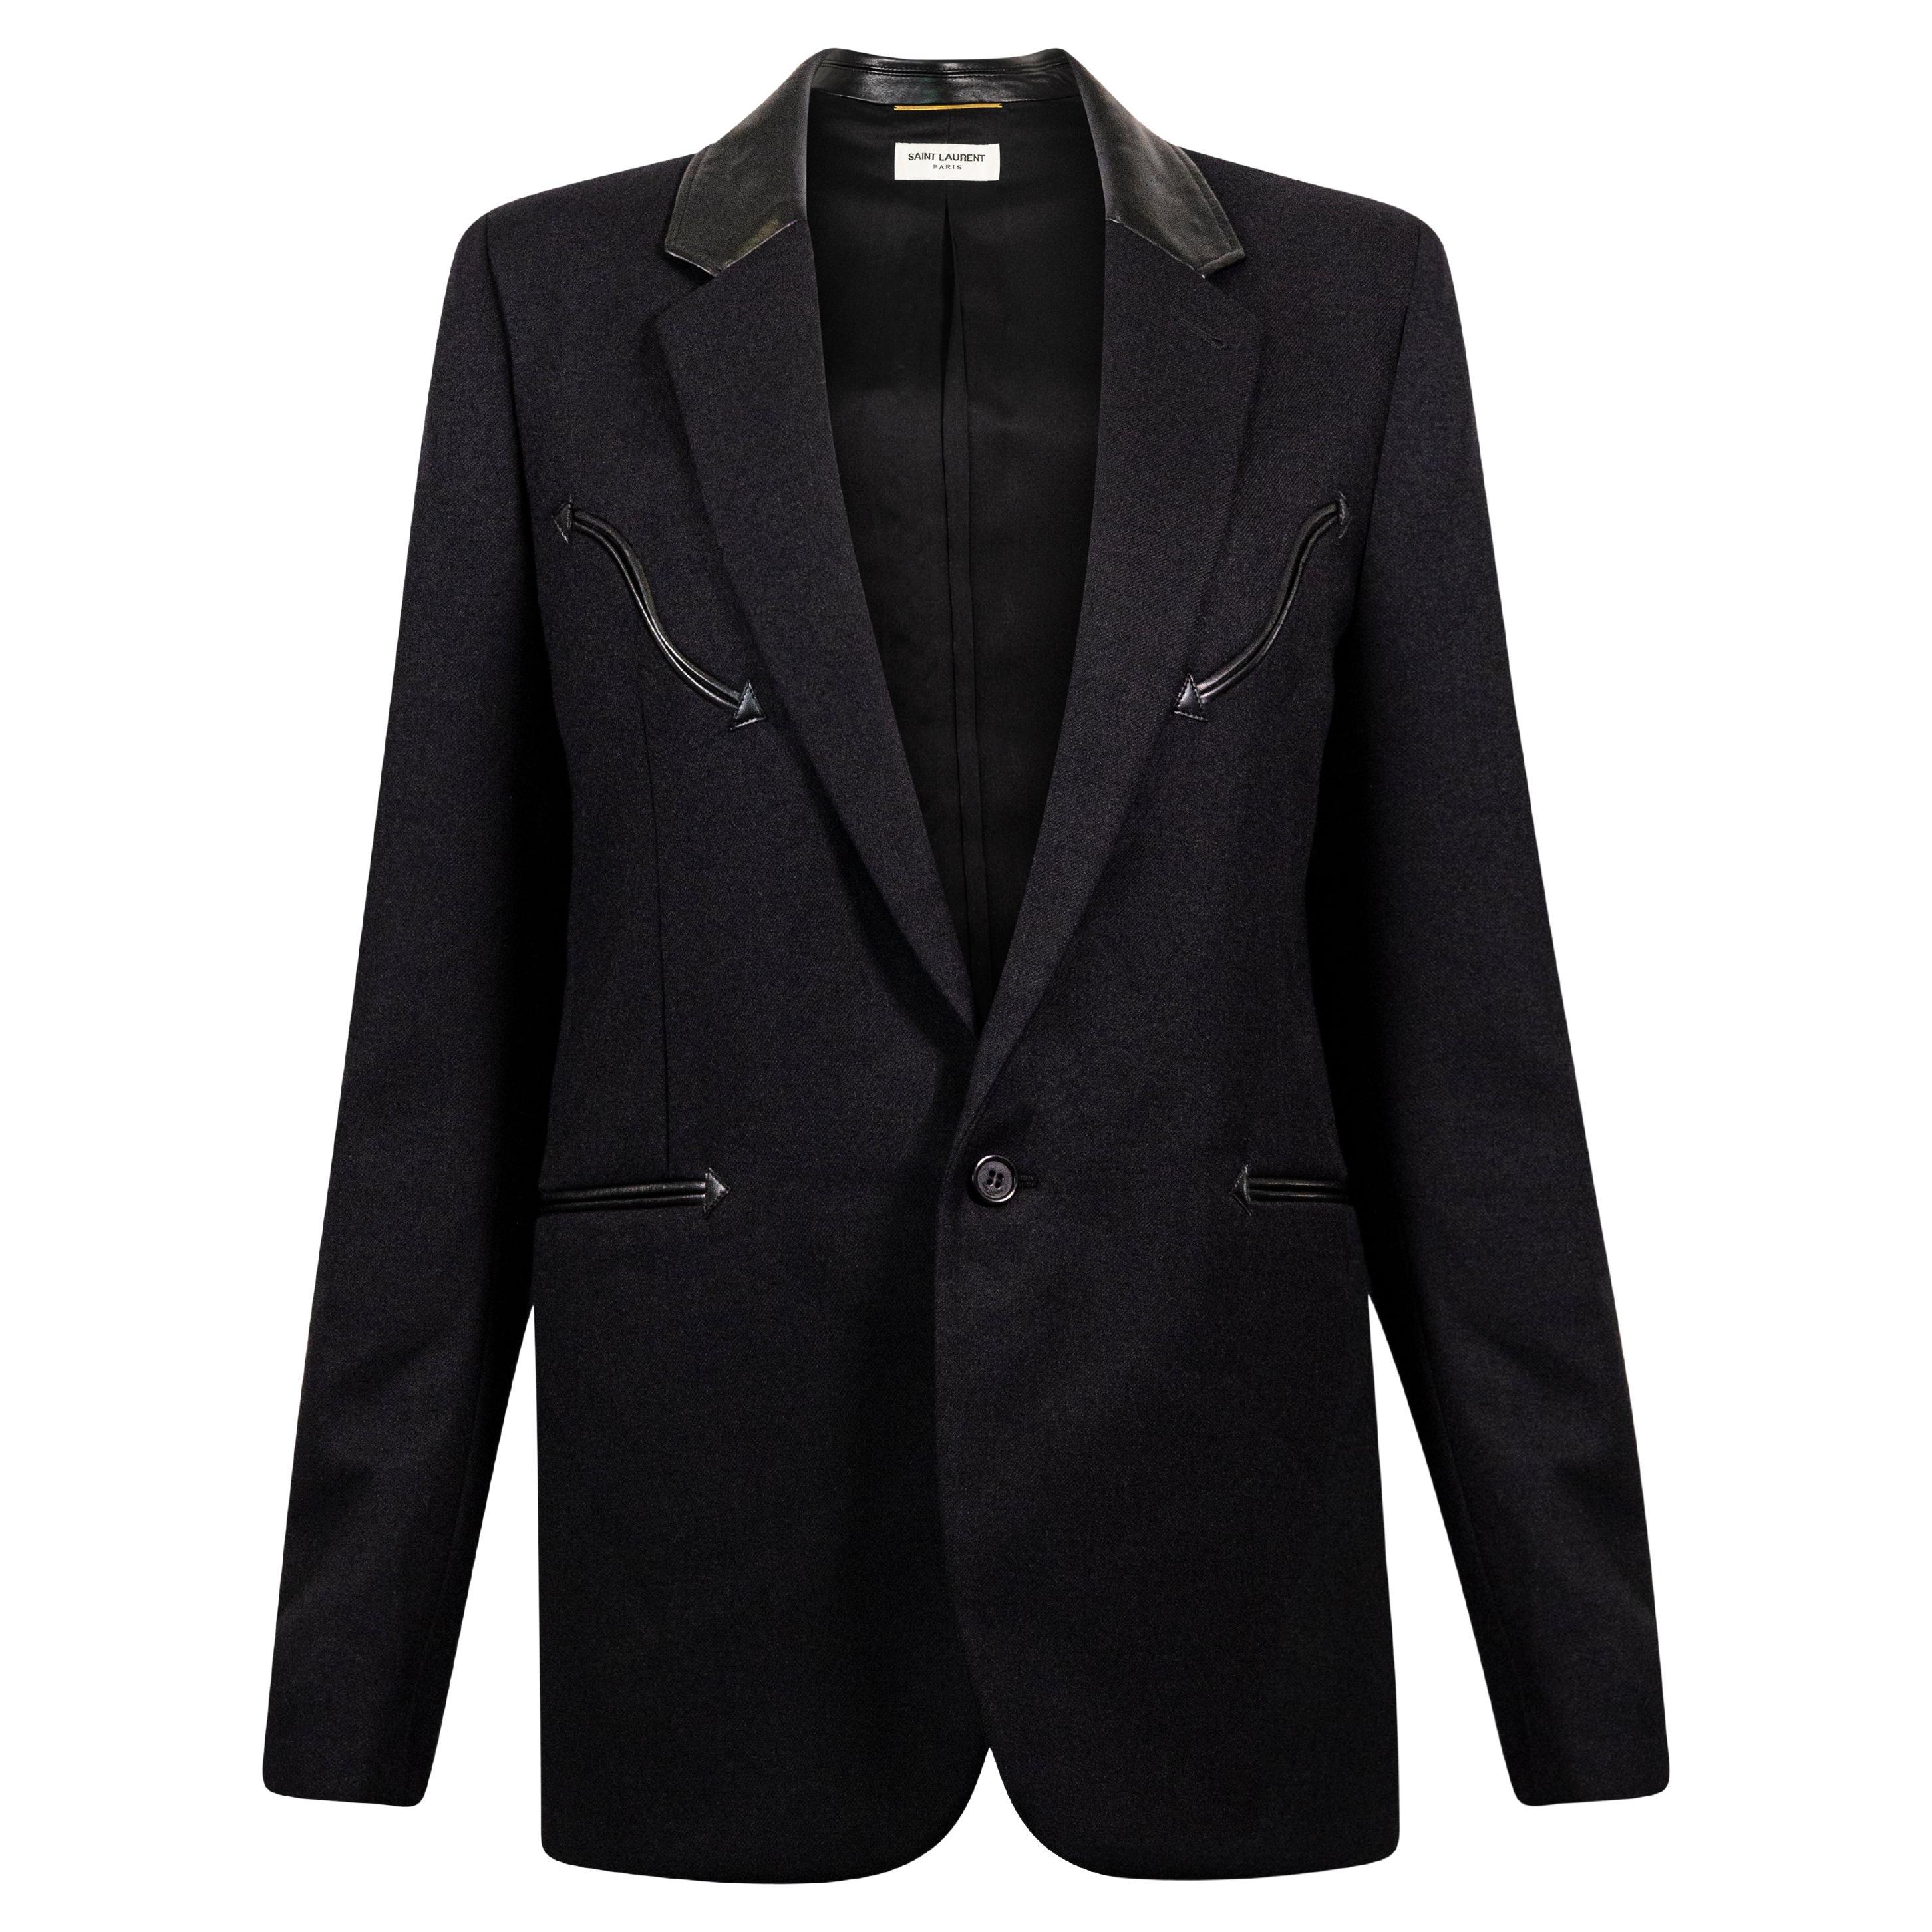 SAINT LAURENT by Anthony Vaccarello Tailored Blazer With Western Style Details